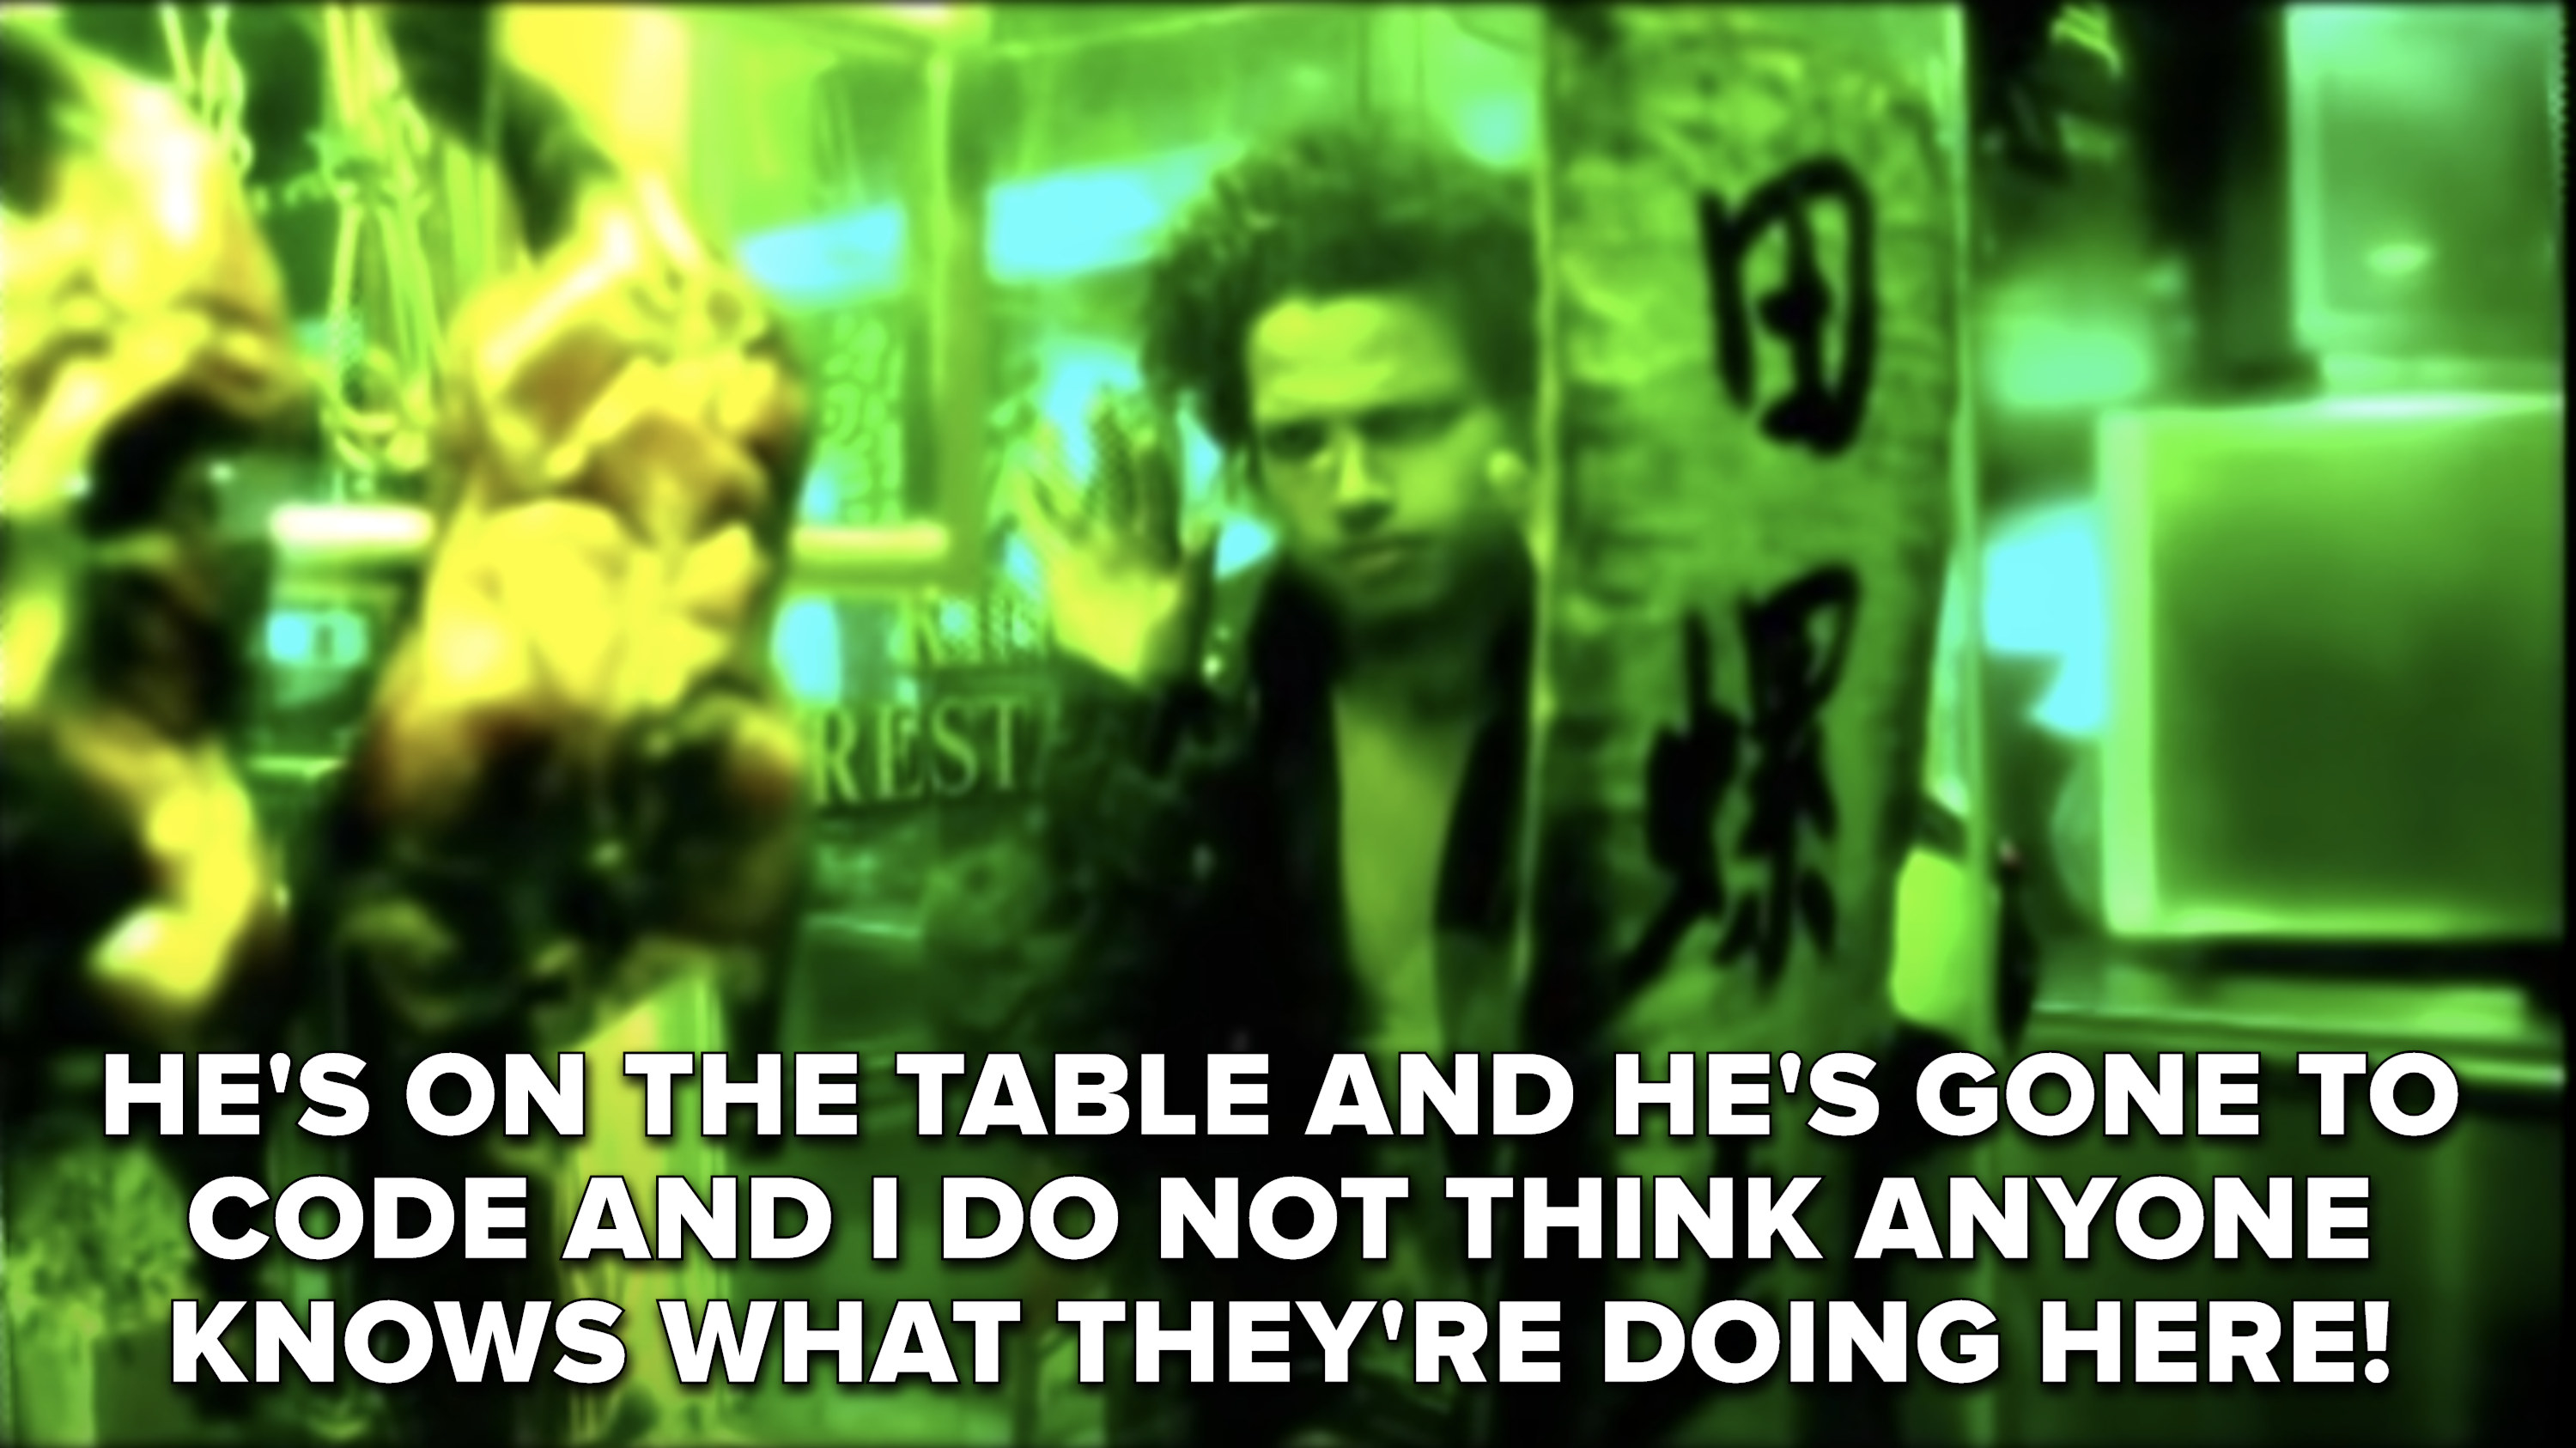 &quot;He&#x27;s on the table and he&#x27;s gone to code and I do not think anyone knows what they&#x27;re doing here&quot;